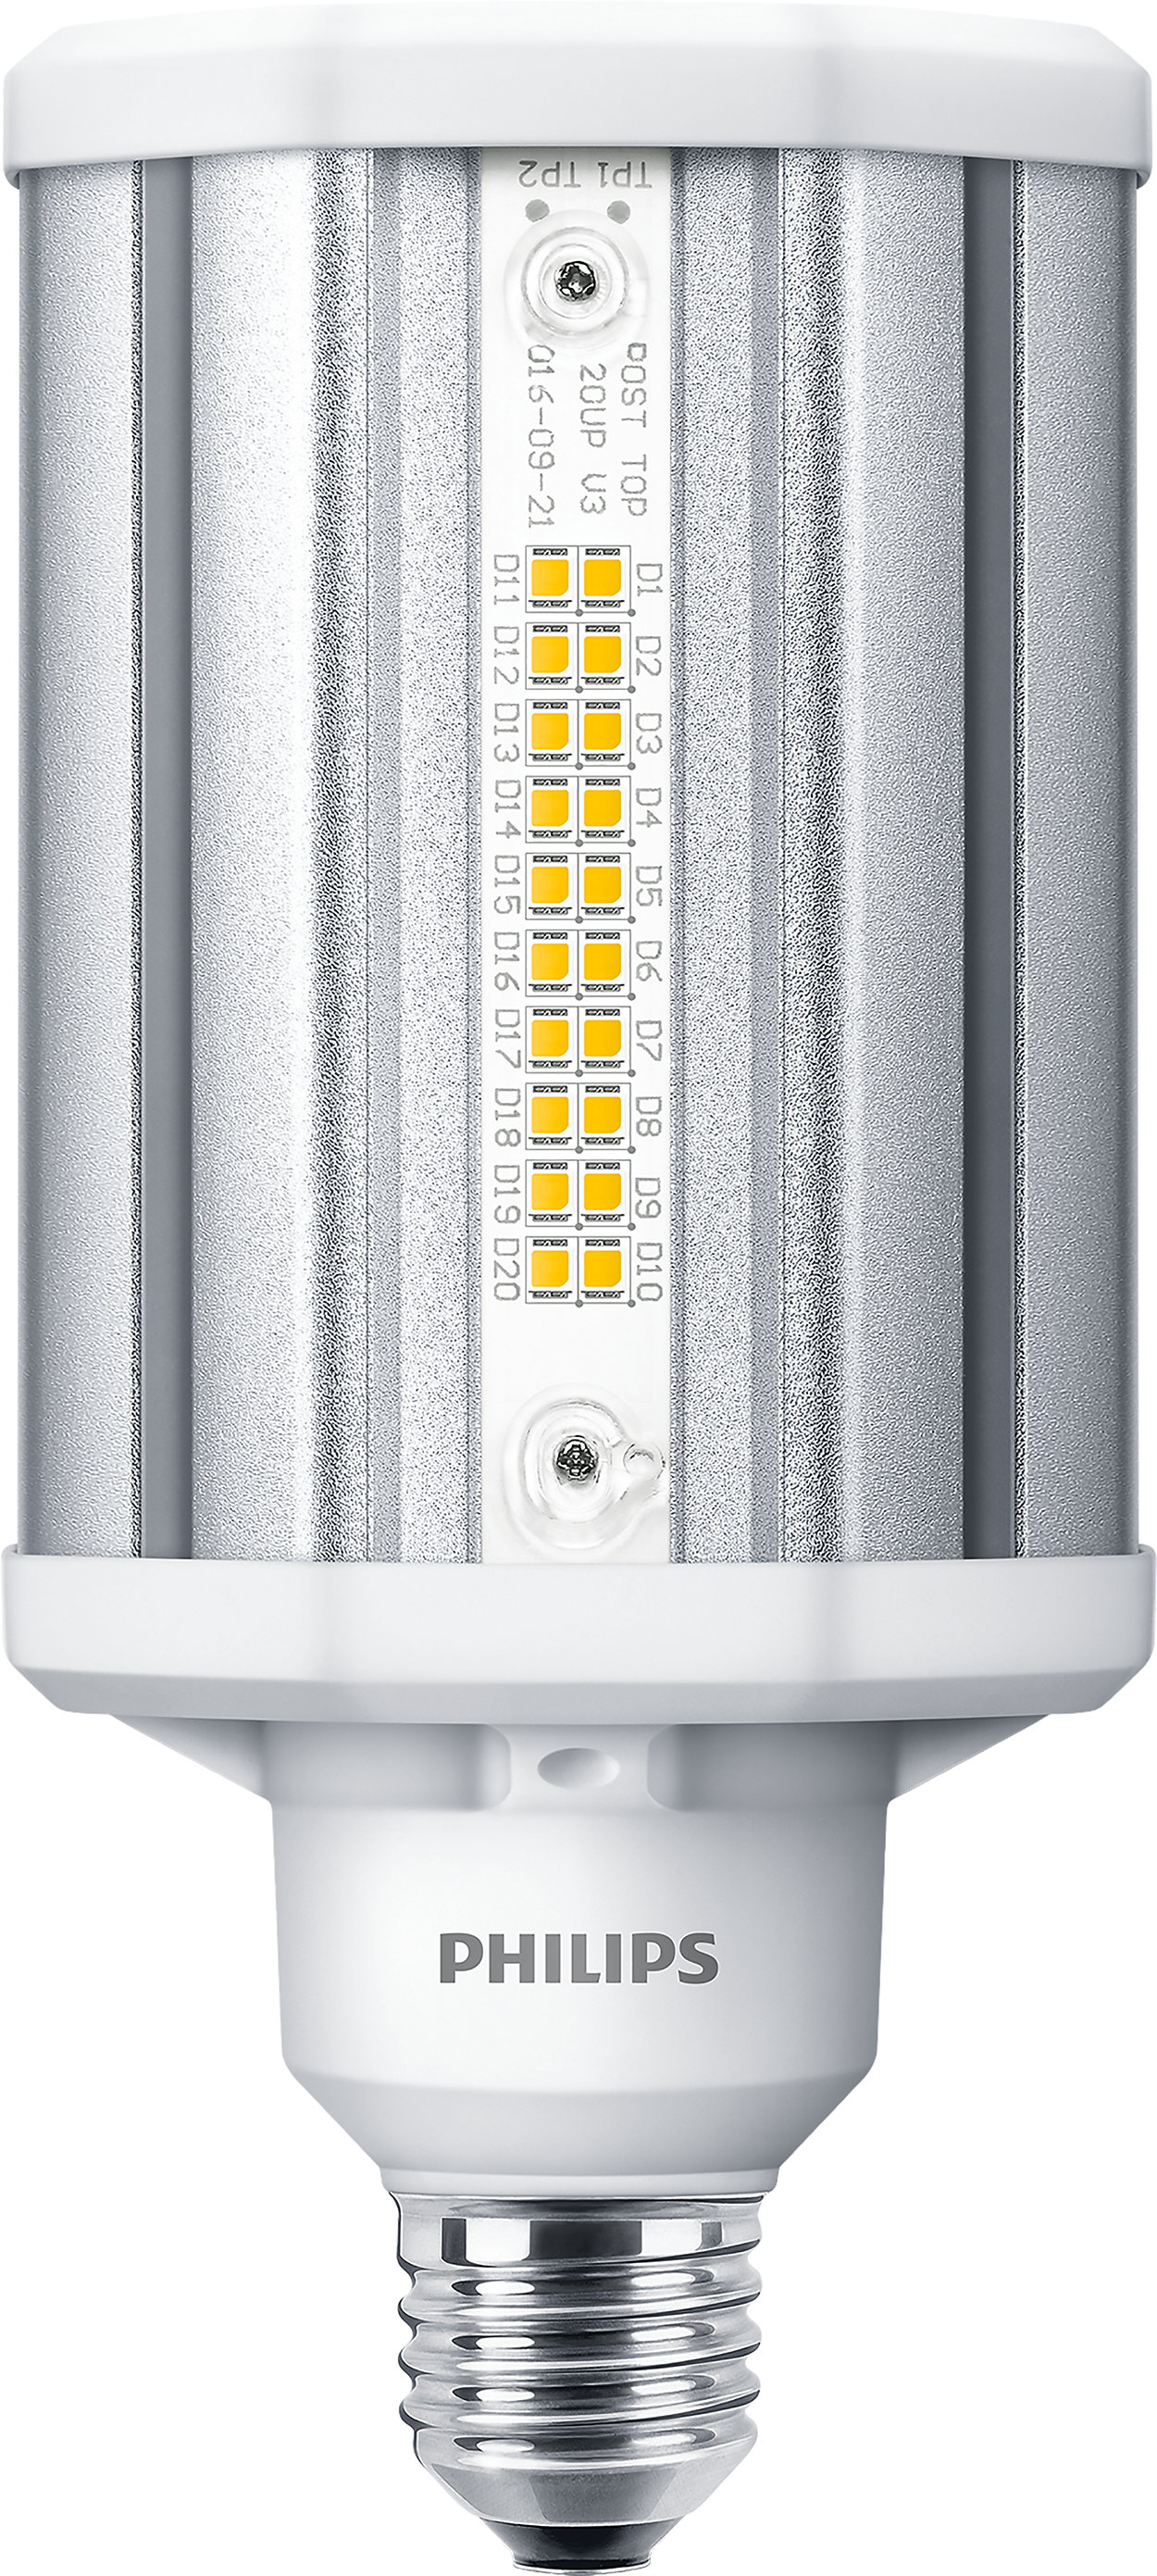 The best LED solution for High-Intensity Discharge (HID) lamp replacement